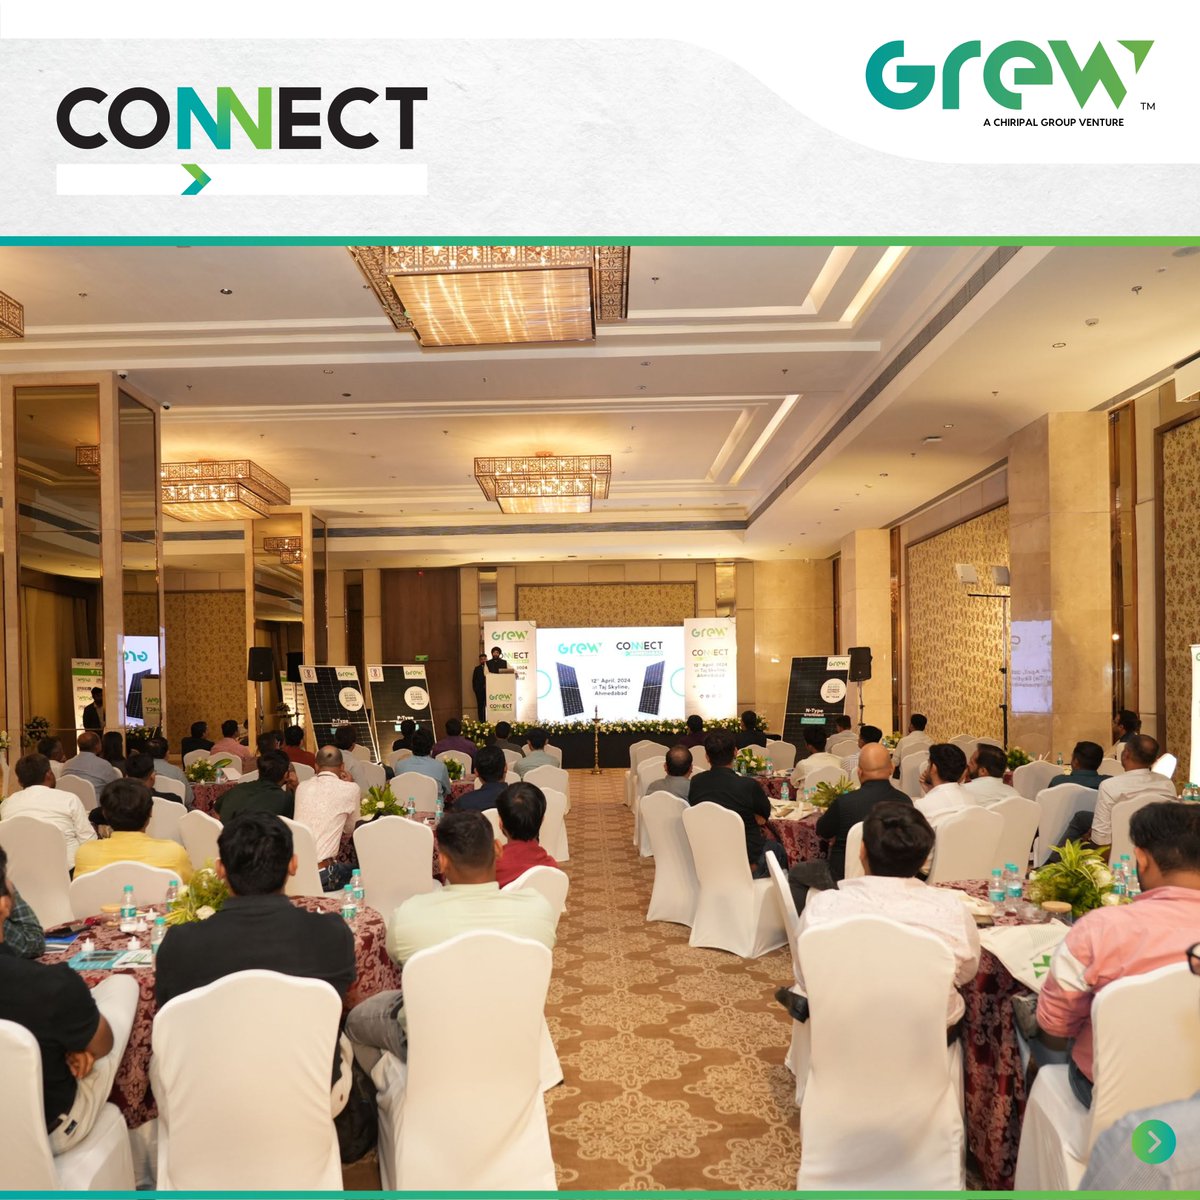 We thank all the delegates for making this event a success.

Here's to many more power-packed collaborations in the future!

GREW CONNECT coming soon to your city.

#CONNECTAhmedabad #AhmedabadEvents #GREWCONNECT #CONNECT #NetworkingEvents #GREW #SolarPower #PoweringtheNext